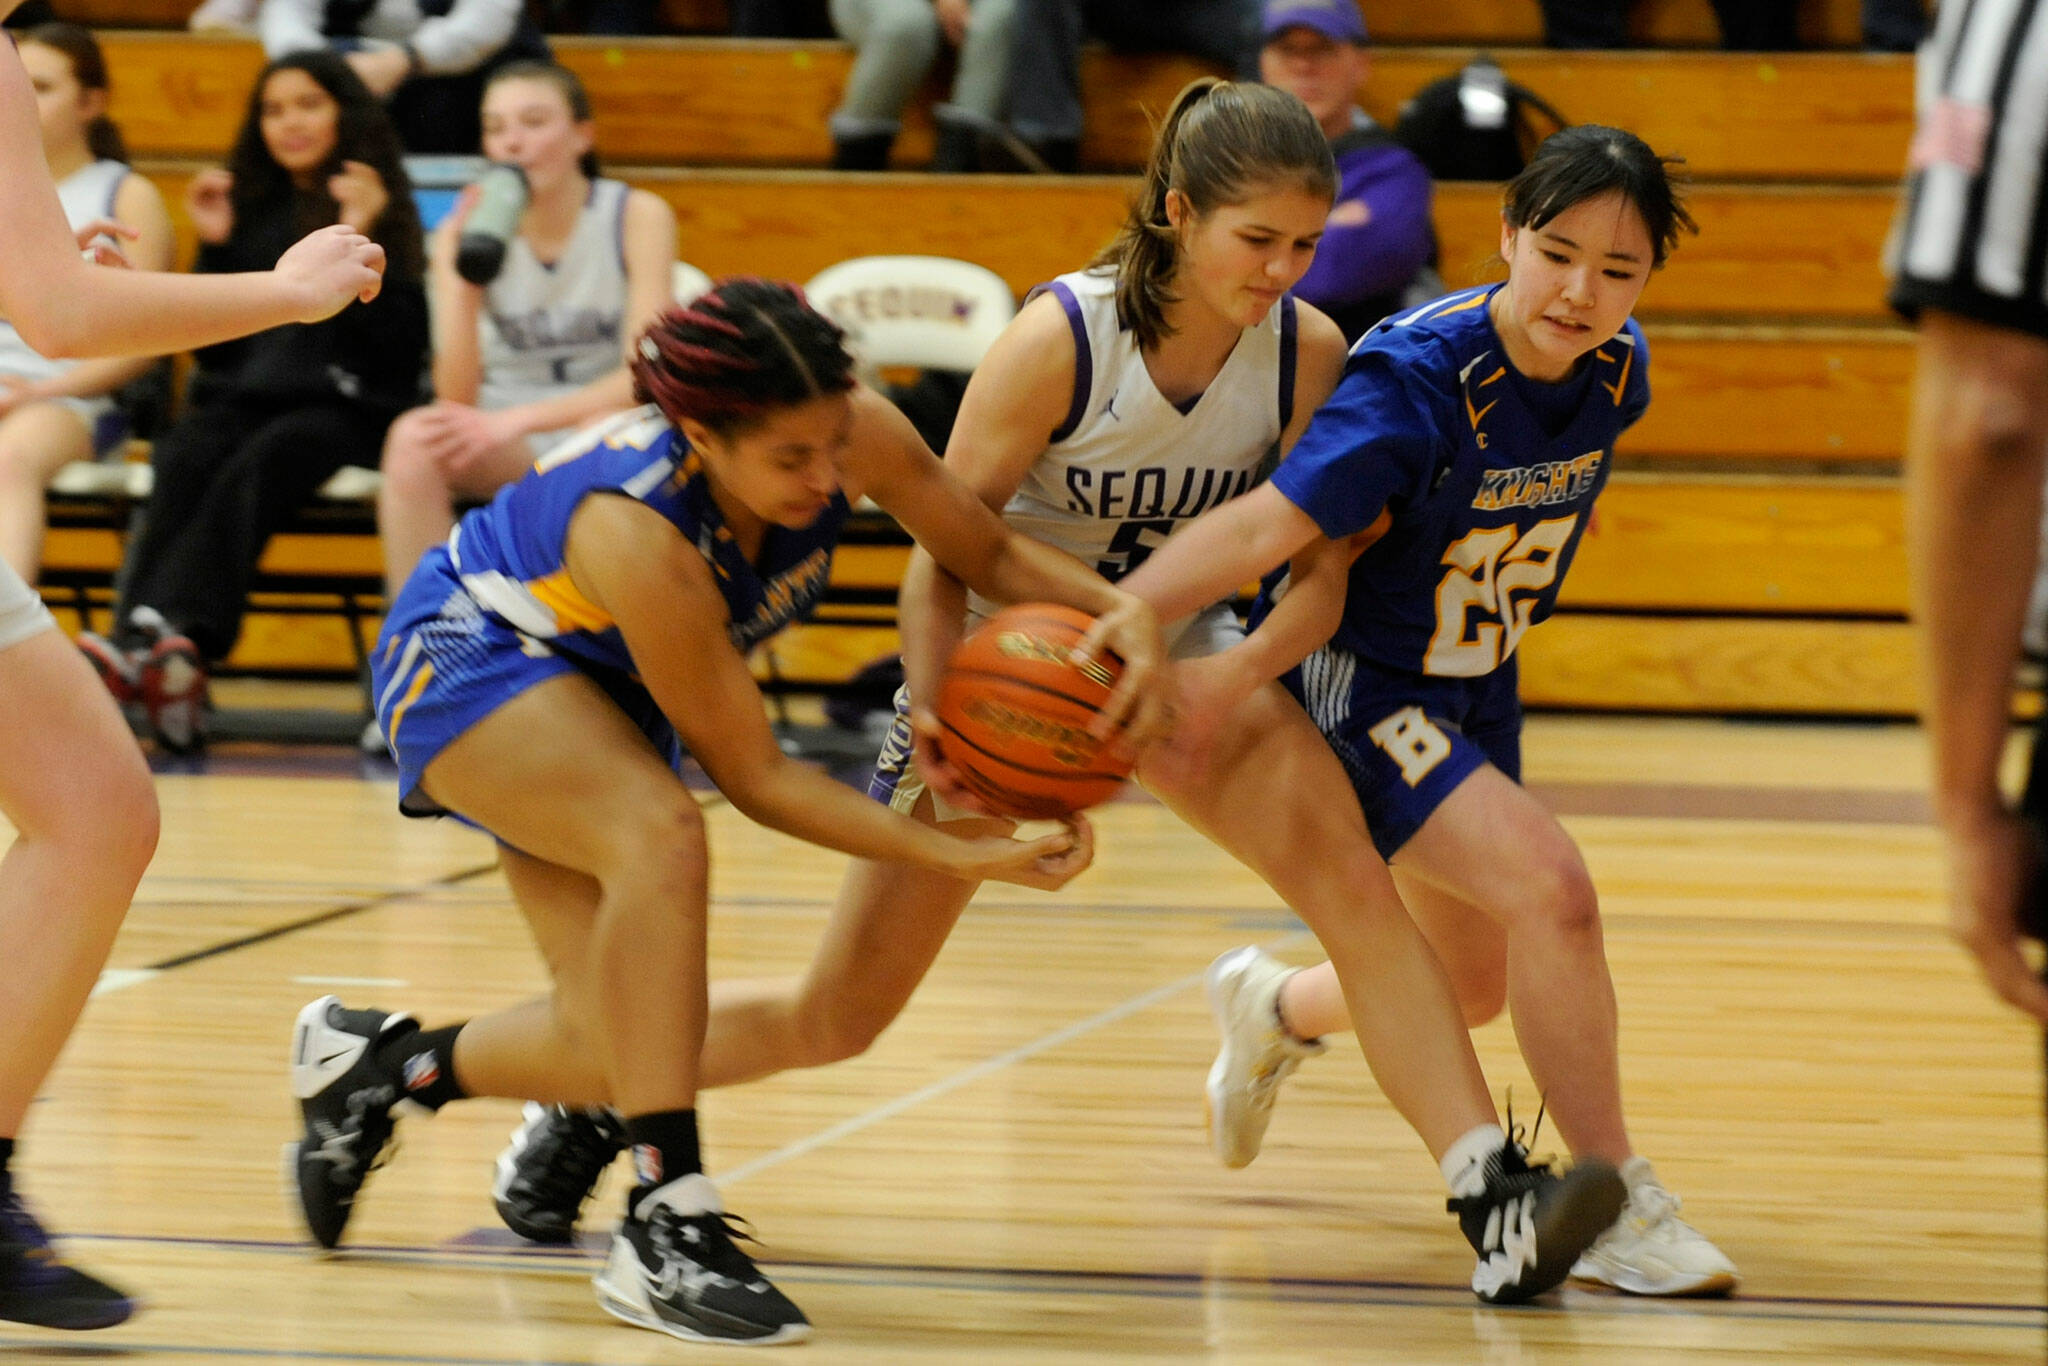 Sequim Gazette photo by Matthew Nash / Sequim’s Raimey Brewer, center, tries to keep the ball from a pair of Bremerton defenders in a 70-41 Sequim home win on Jan. 19.